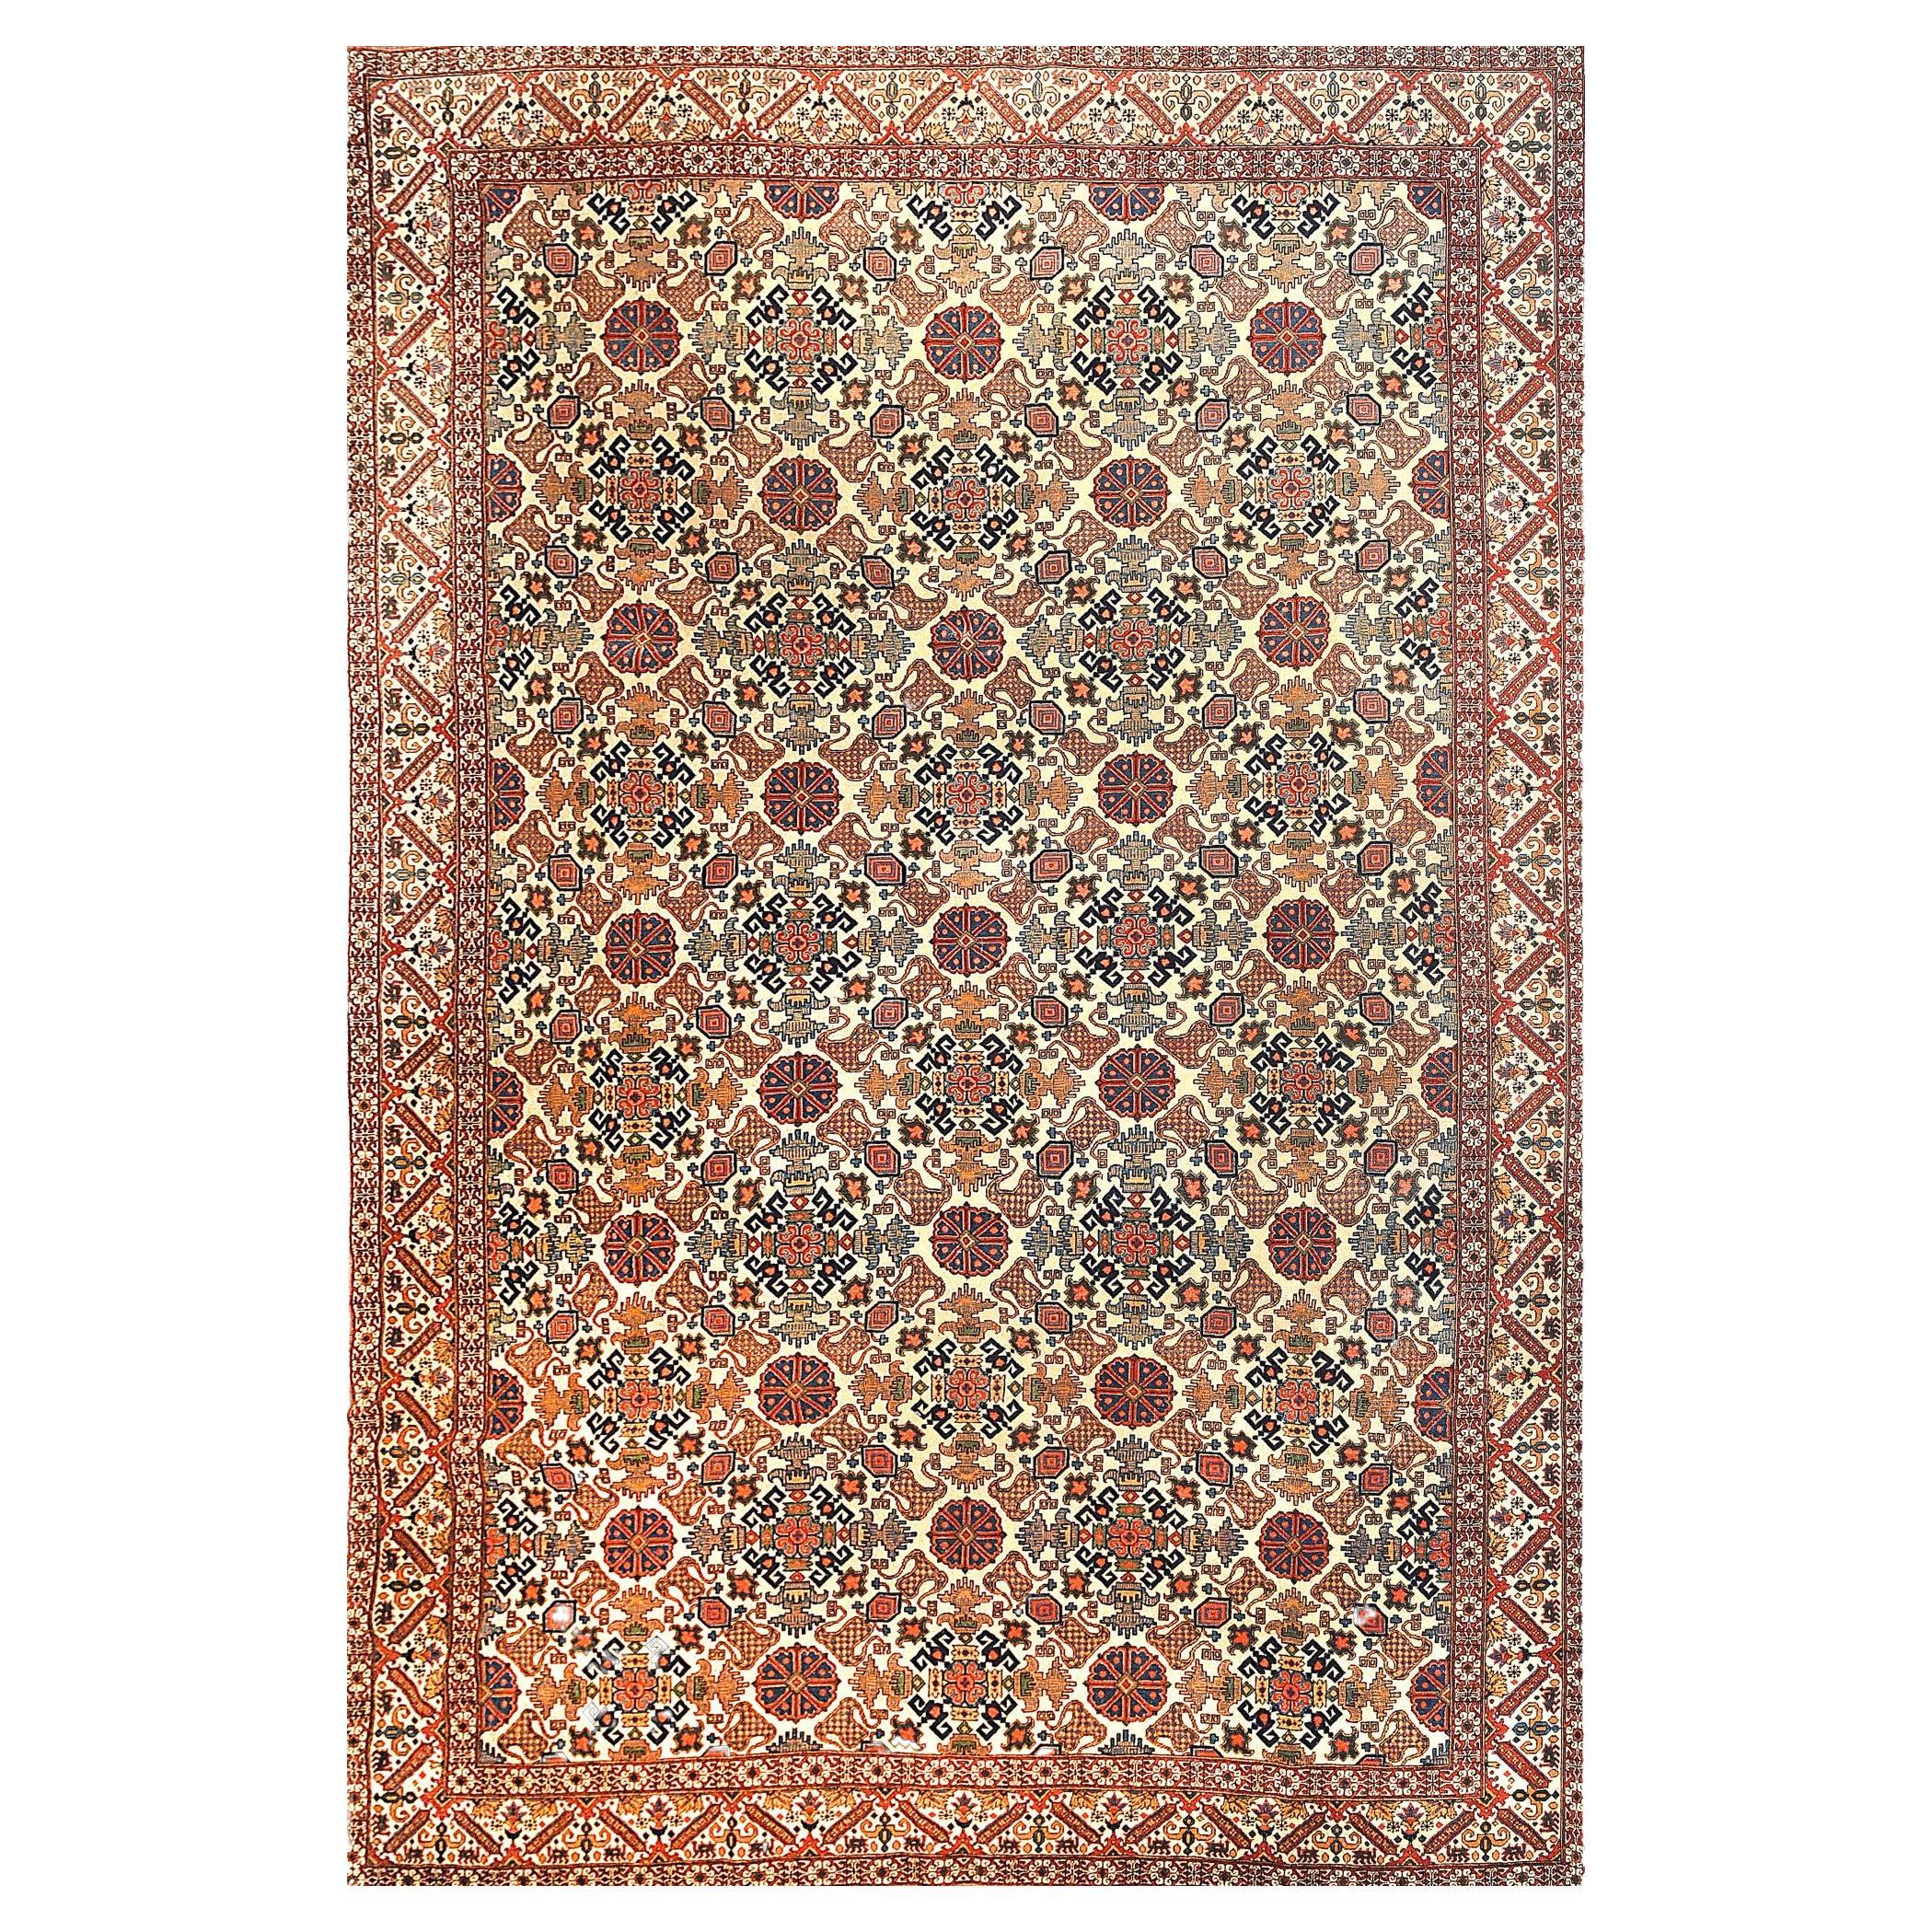 Extremely Fine Antique Persian Tehran Wool Rug 7'3'' x 10'0''